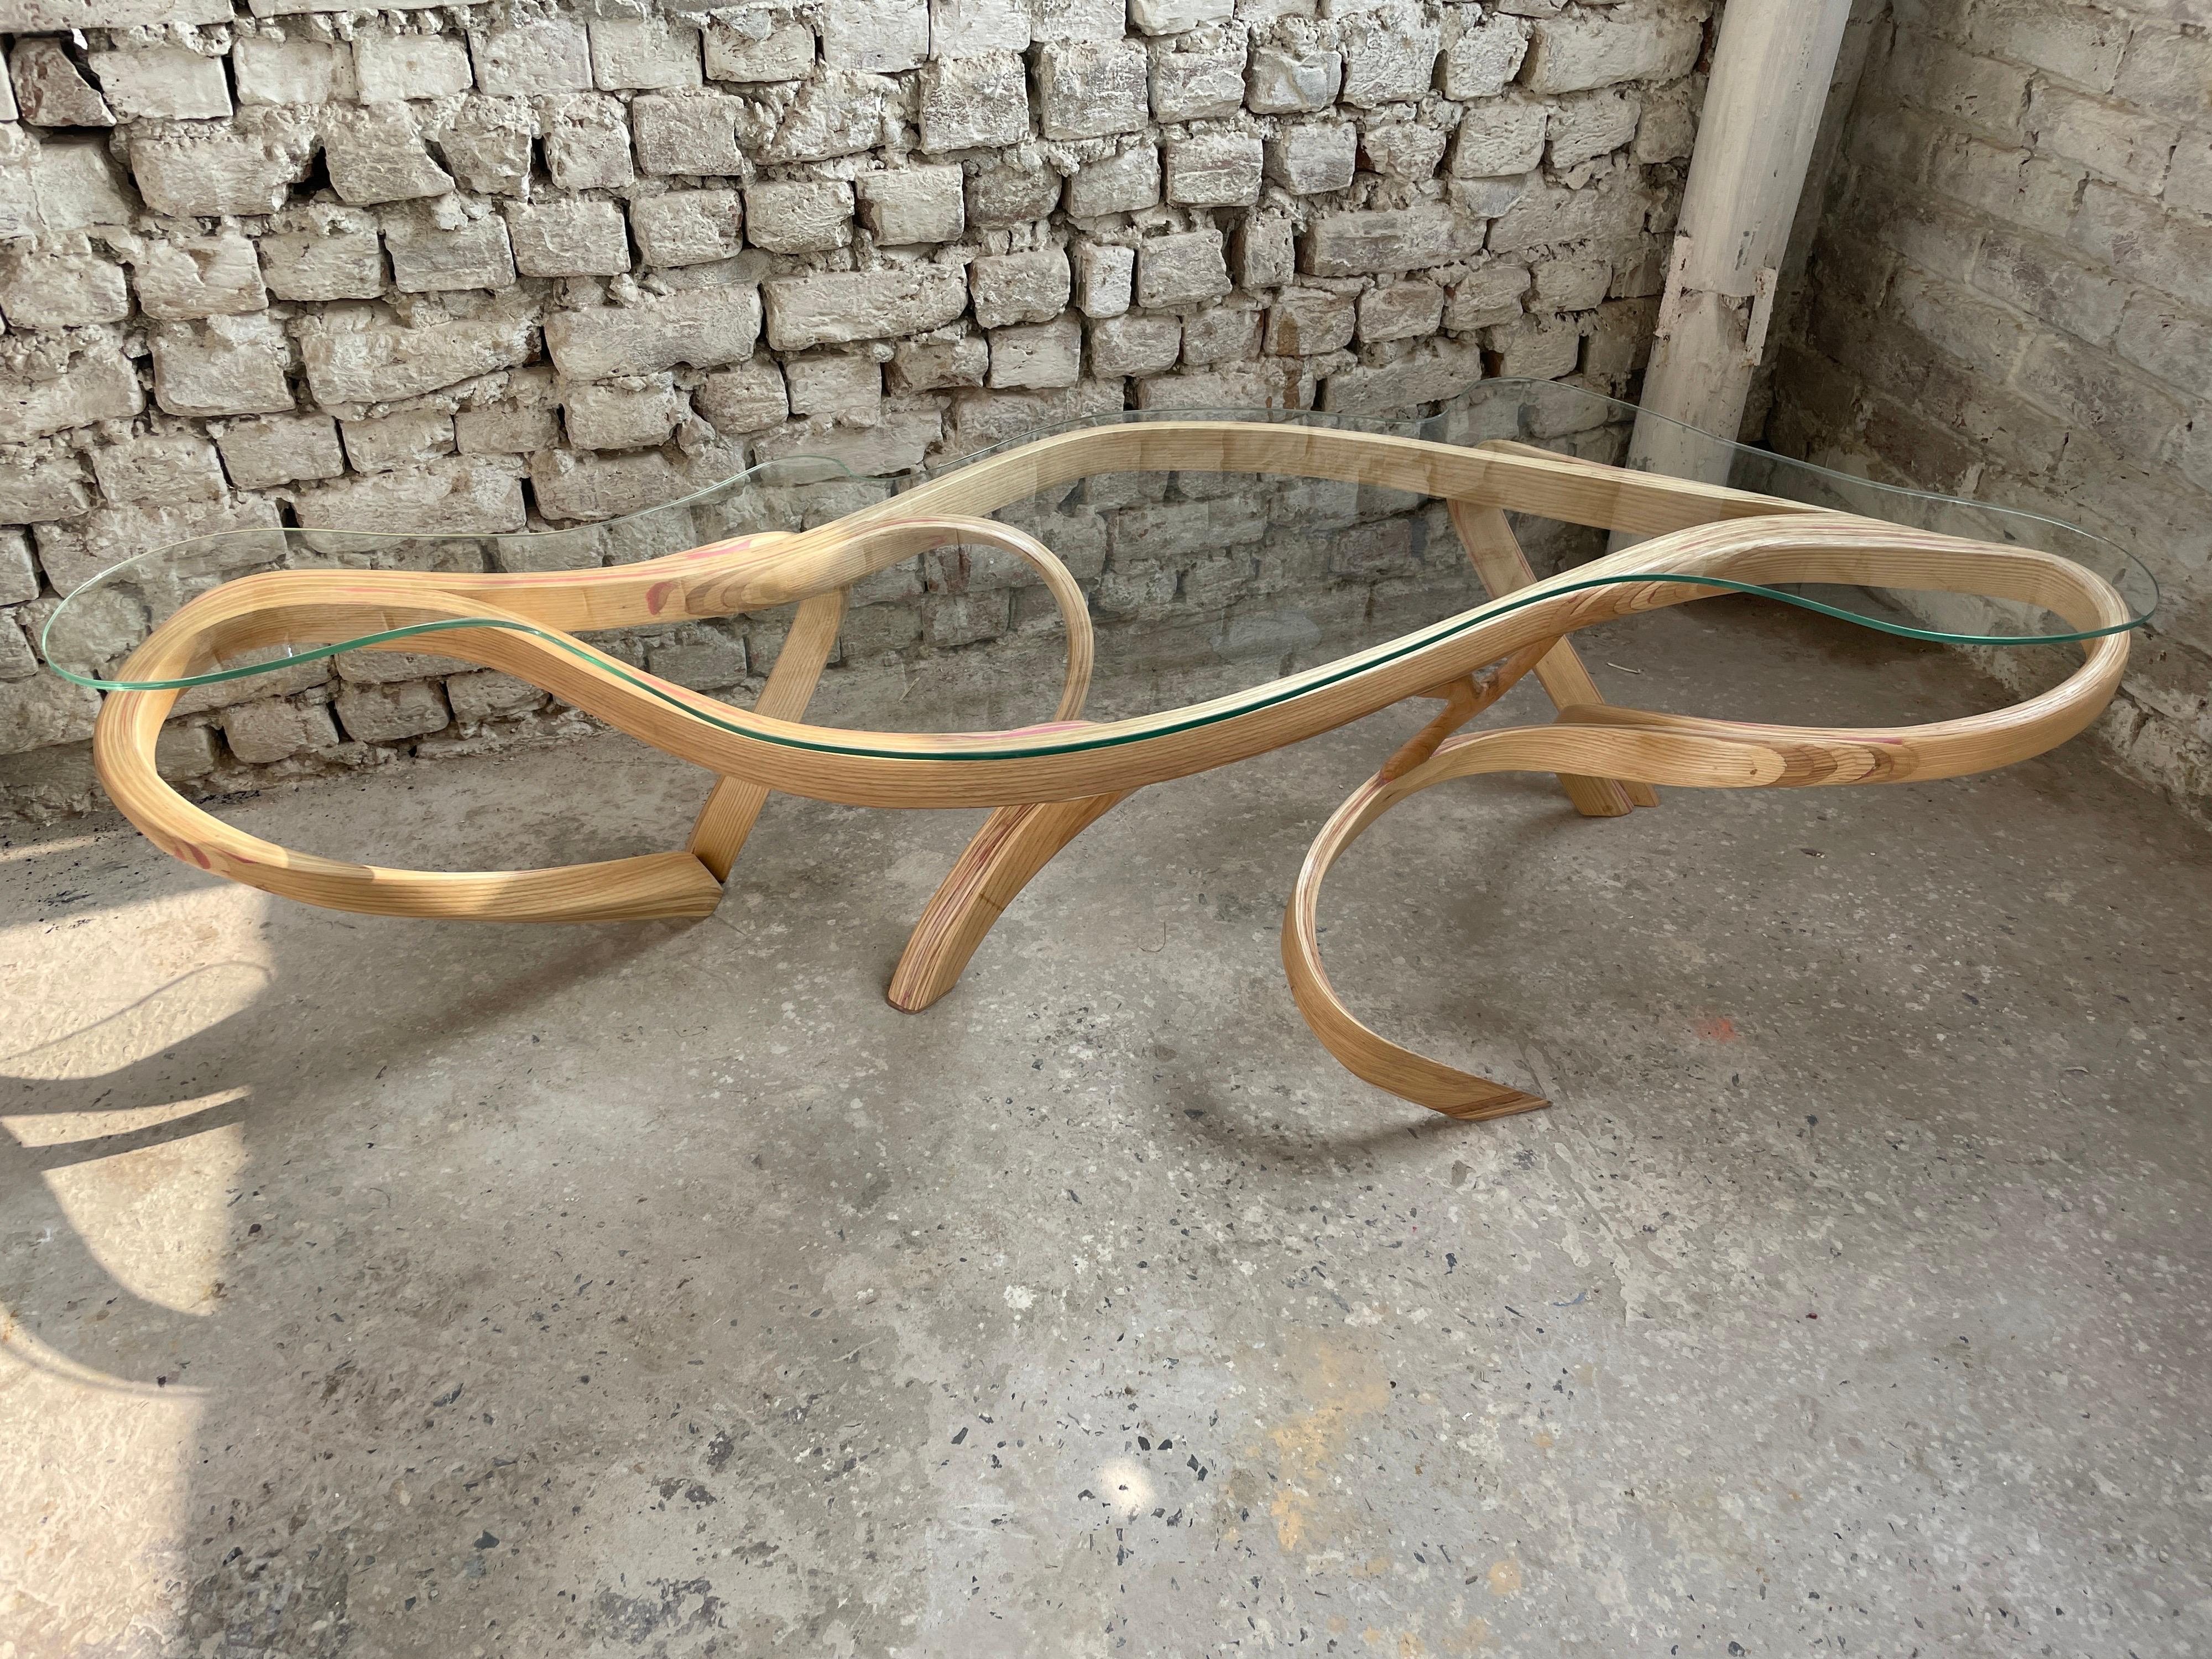 Oculus Centre Table by Raka Studio, Bent Wood In New Condition For Sale In Cape Girardeau, MO